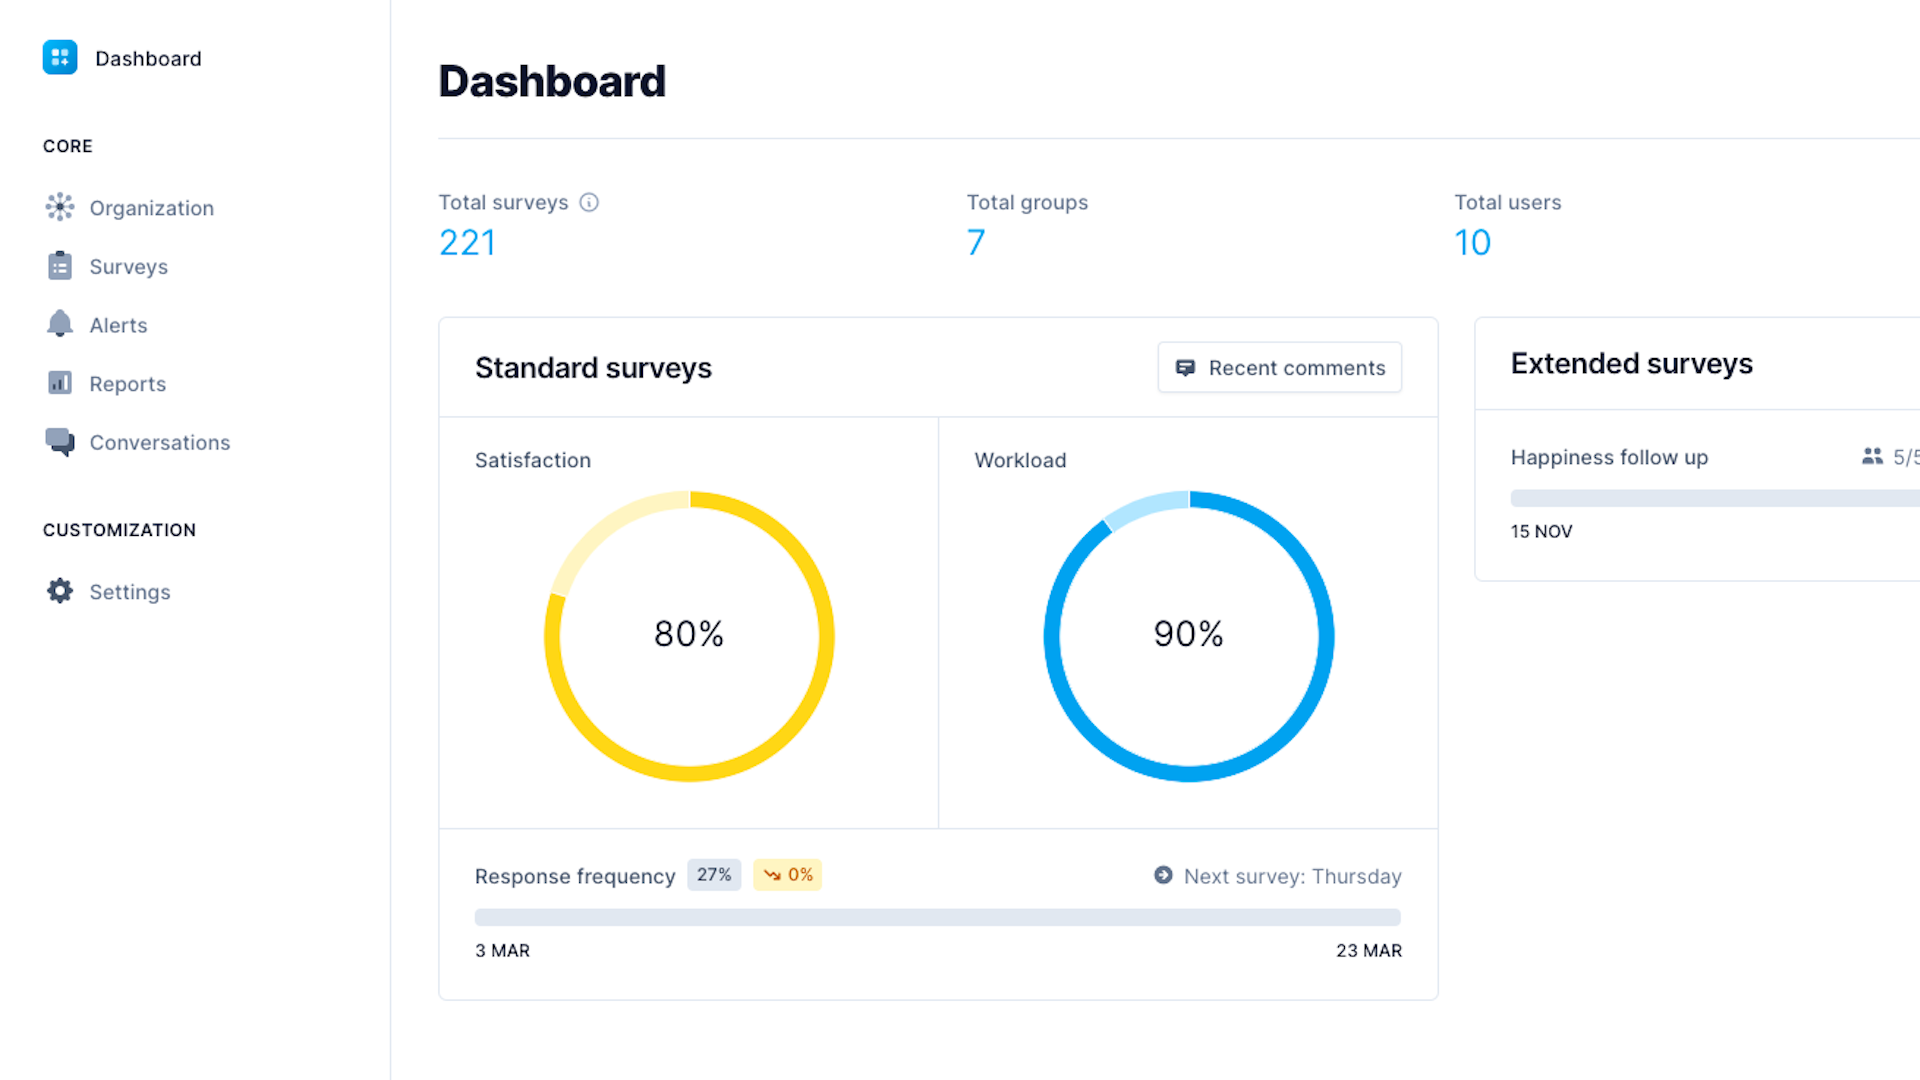 An overview of the platform and the dashboard